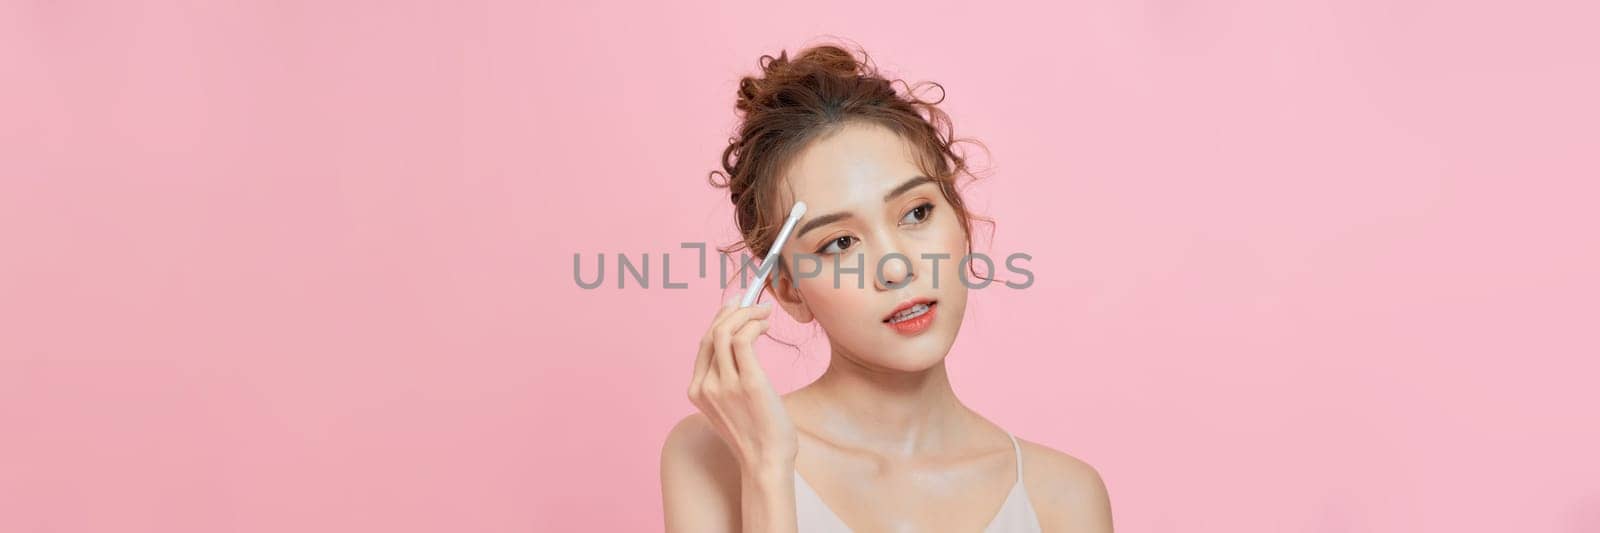 Girl with makeup brushes near face